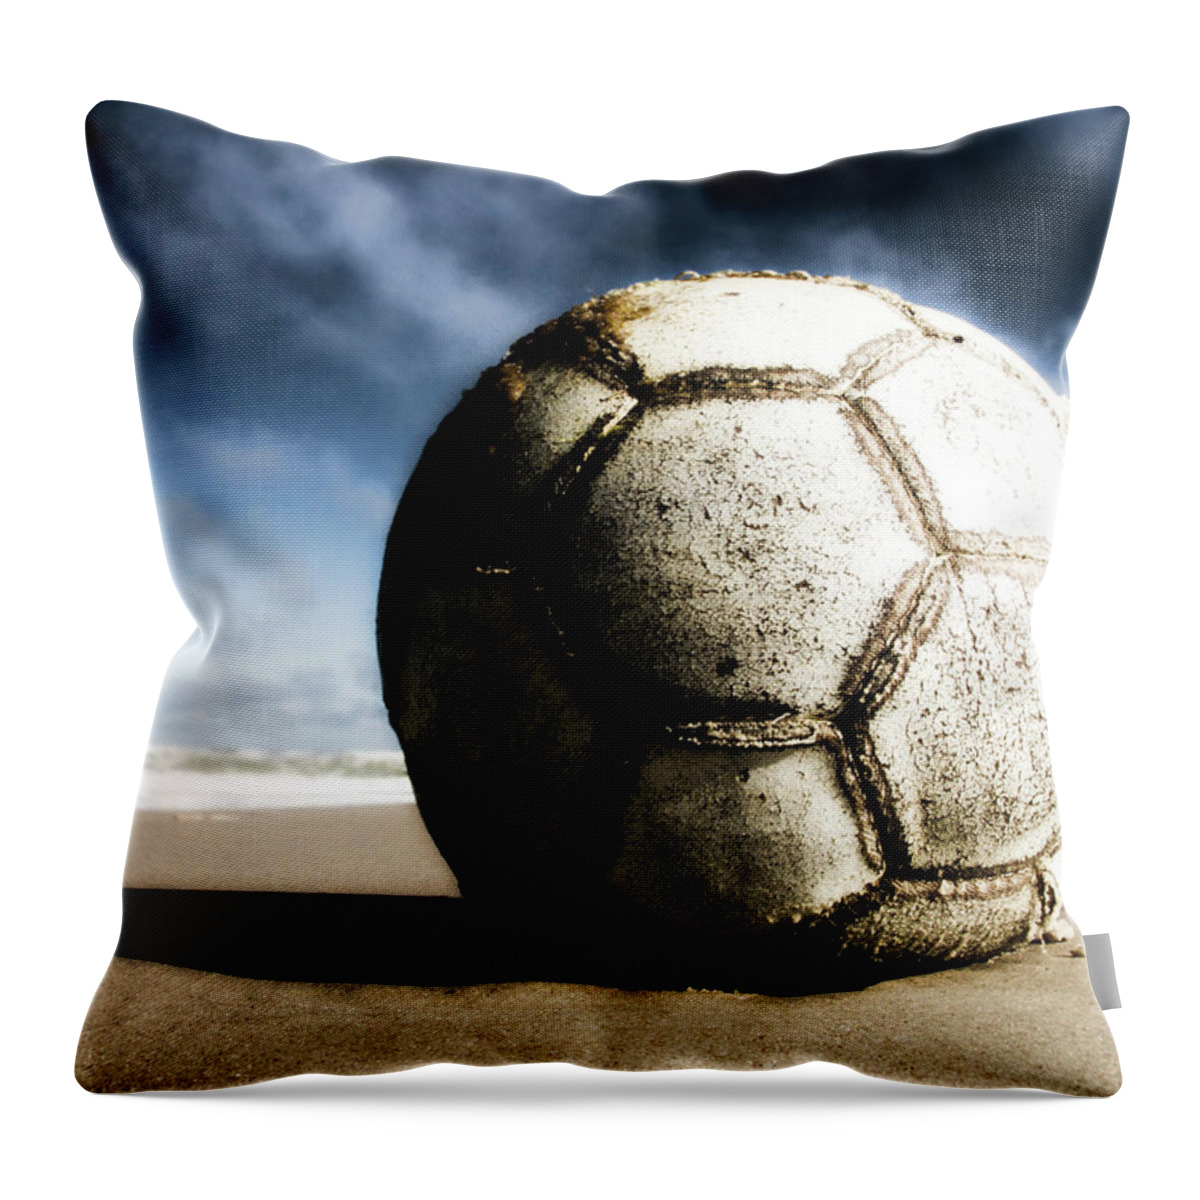 Shadow Throw Pillow featuring the photograph Worn And Old Soccer Ball On Sand by Vithib